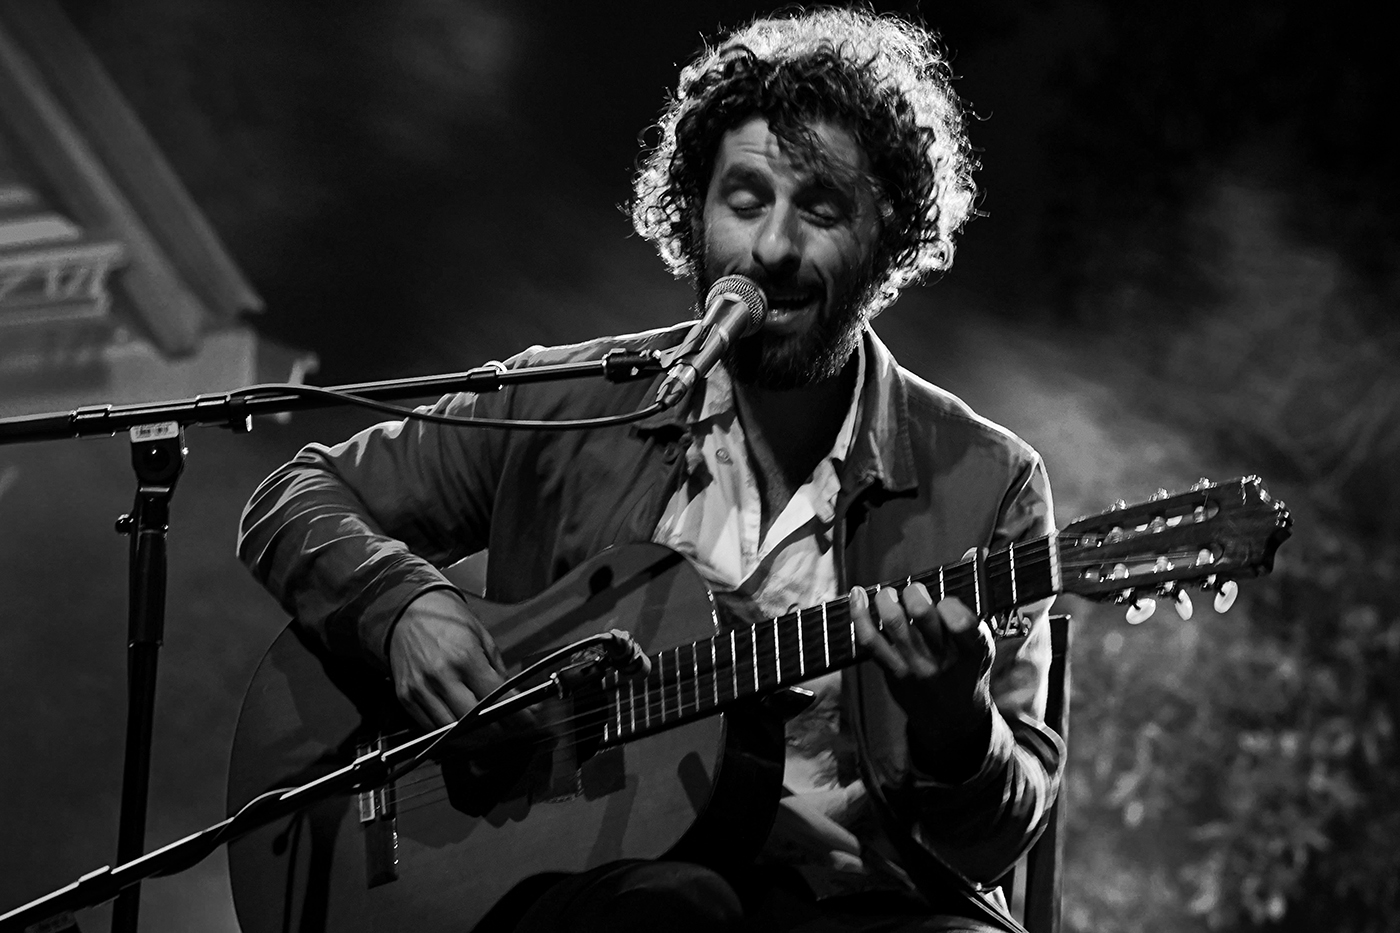 José González played a crowd-pleasing show at Red Butte Gardens that ran against expectations, wowing the audience with his signature Spanish lullabies. (Photo: Jovvany Villalobos)